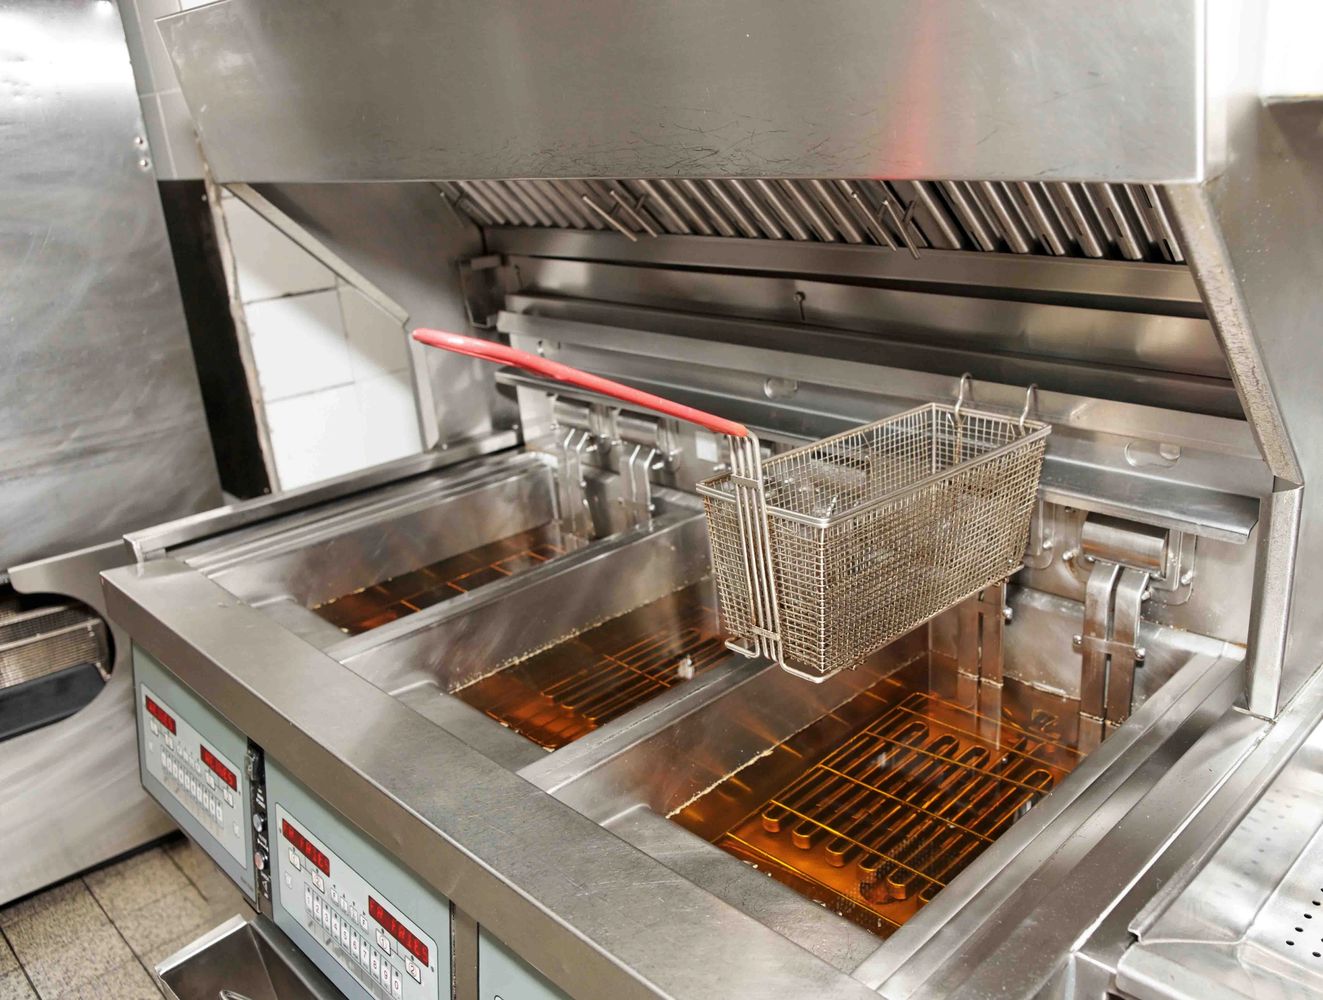 Clean fryer with ecoFRY Fryer Management filtration system